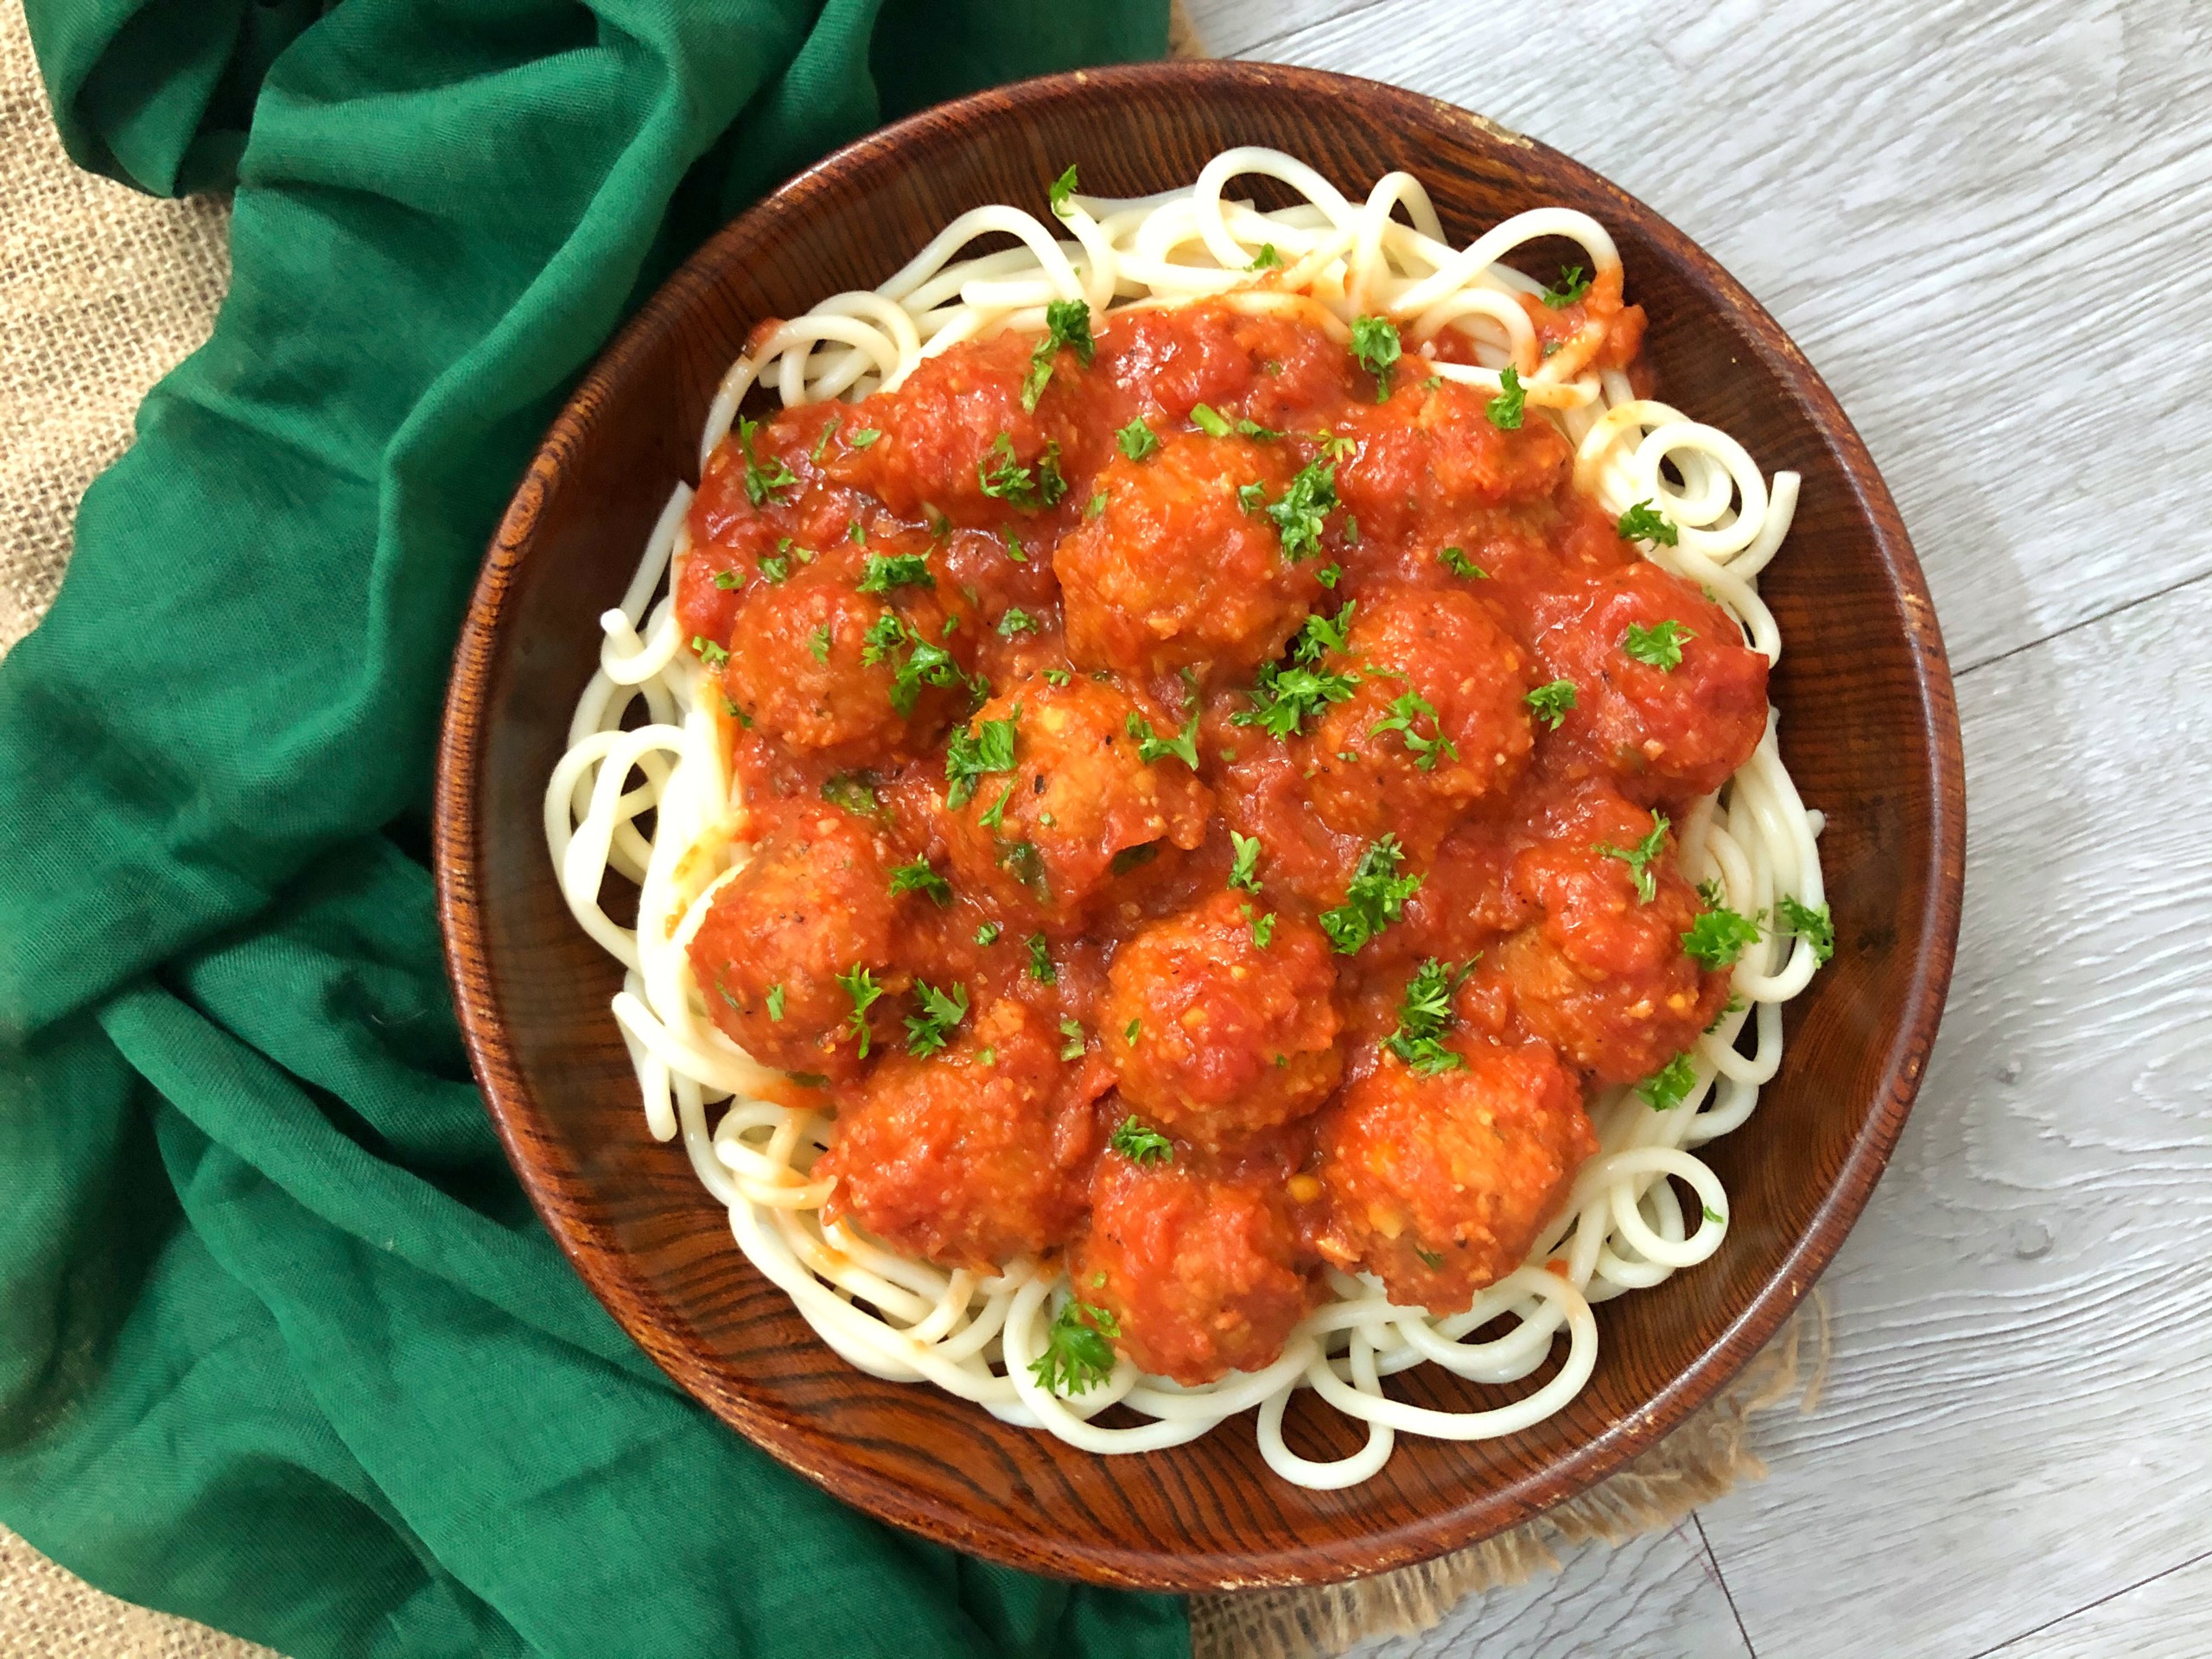 Vegan meatball from chickpea